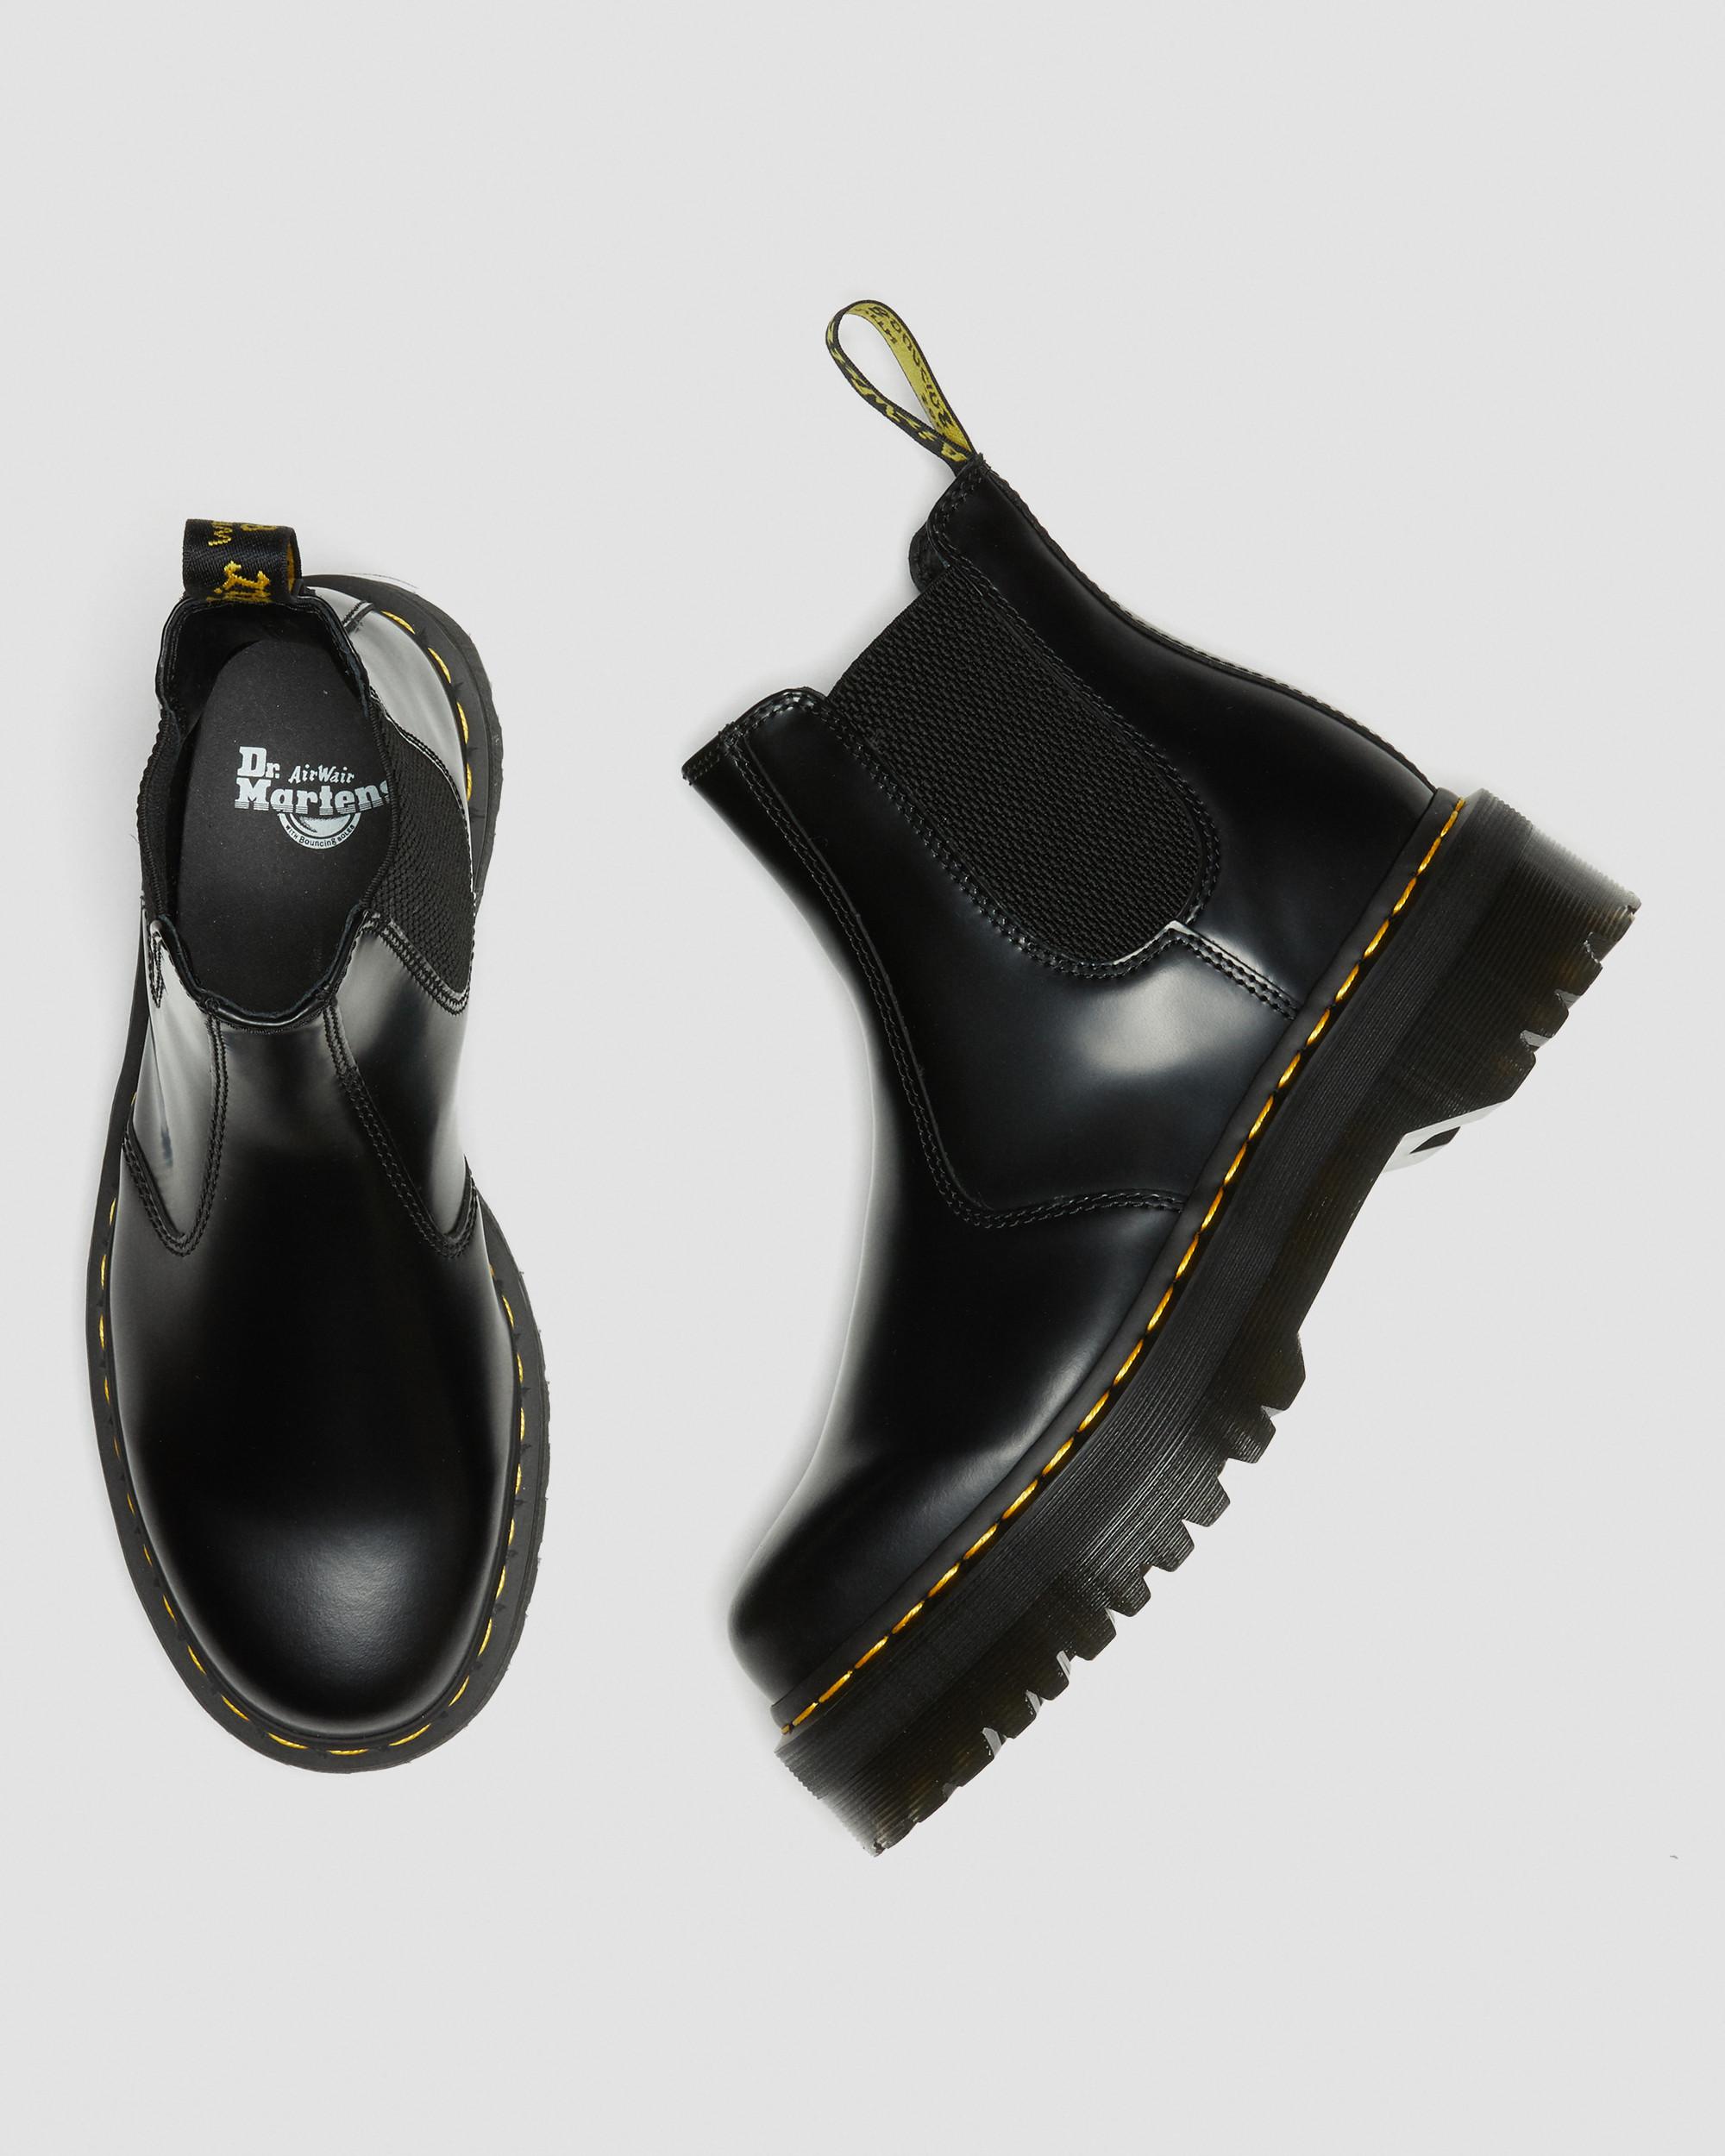 2976 Smooth Leather Platform Chelsea Boots in Black